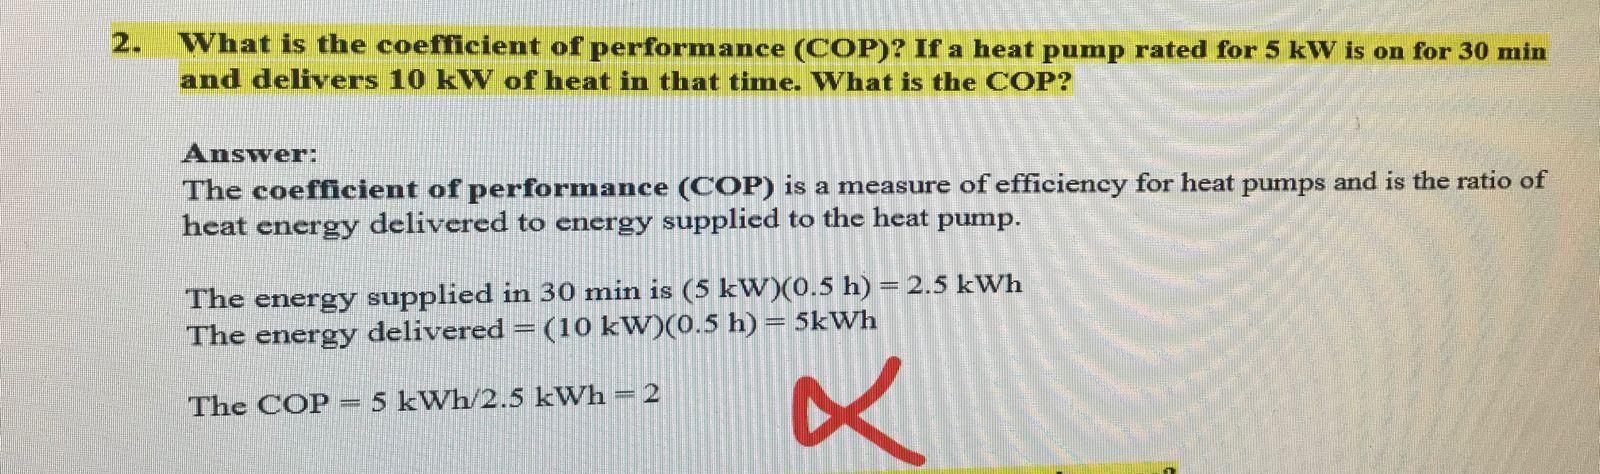 What is the coefficient of performance (COP)? If a heat pump rated for 5 kW is on for 30 min and delivers 10